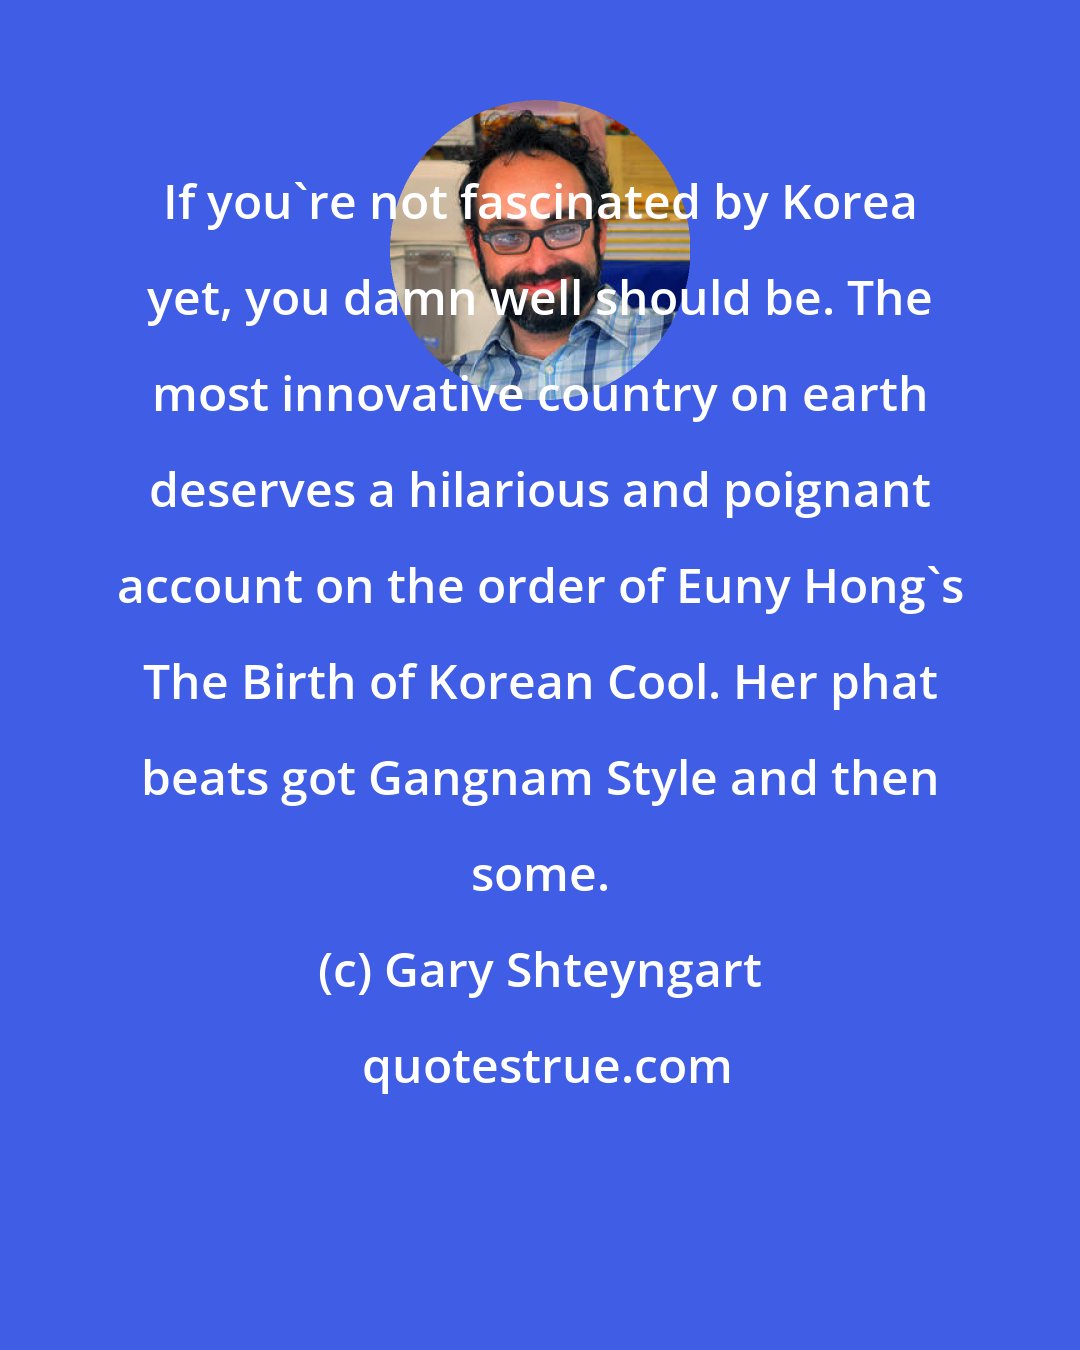 Gary Shteyngart: If you're not fascinated by Korea yet, you damn well should be. The most innovative country on earth deserves a hilarious and poignant account on the order of Euny Hong's The Birth of Korean Cool. Her phat beats got Gangnam Style and then some.